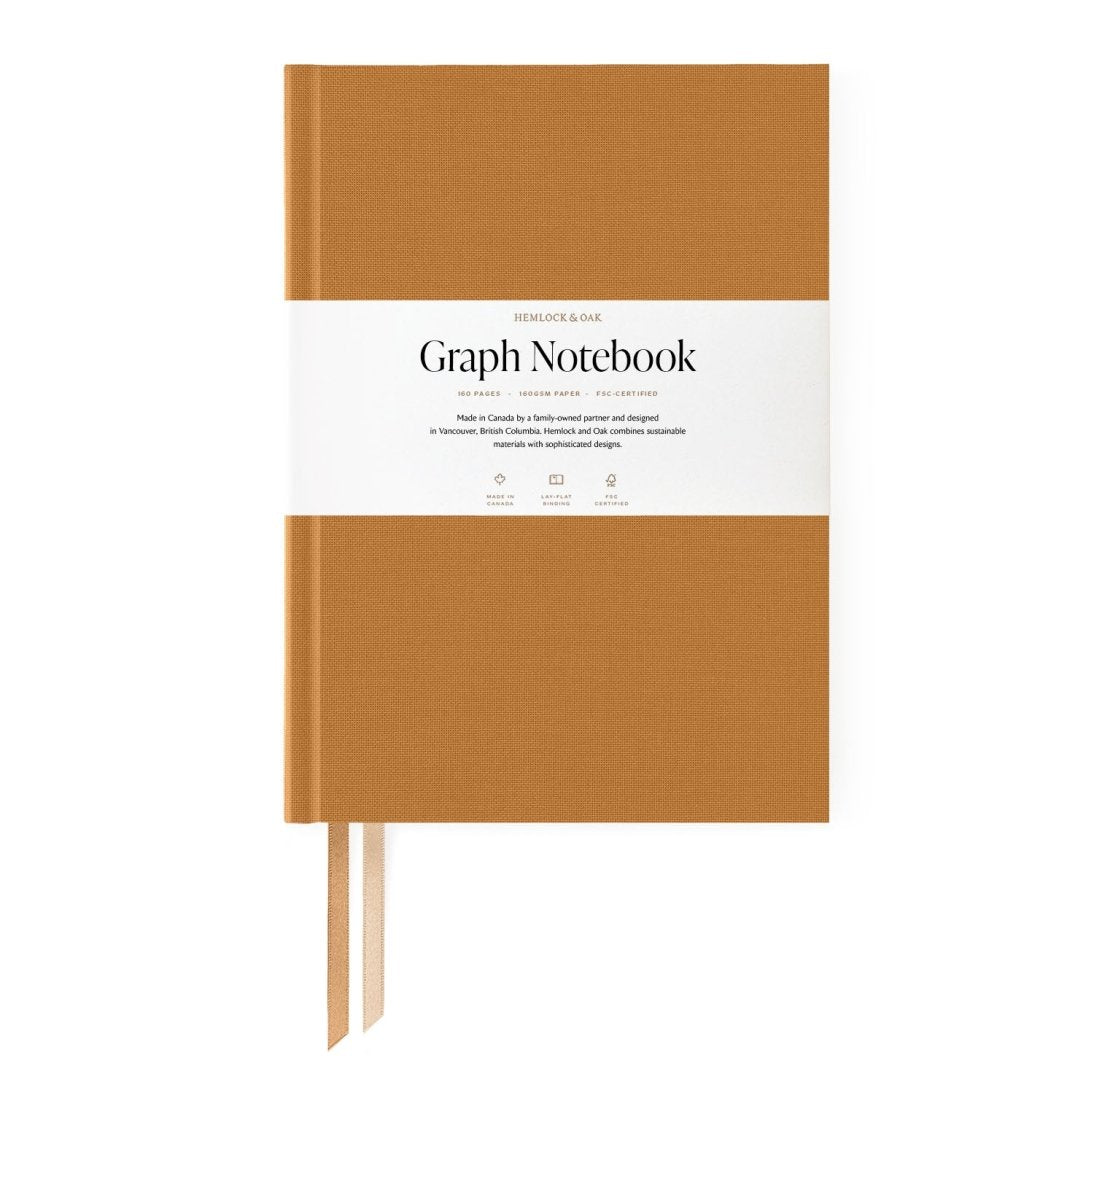 Notebooks (Imperfect) Marigold - Graph Notebook - No Foil #color_ Marigold - Graph Notebook - No Foil